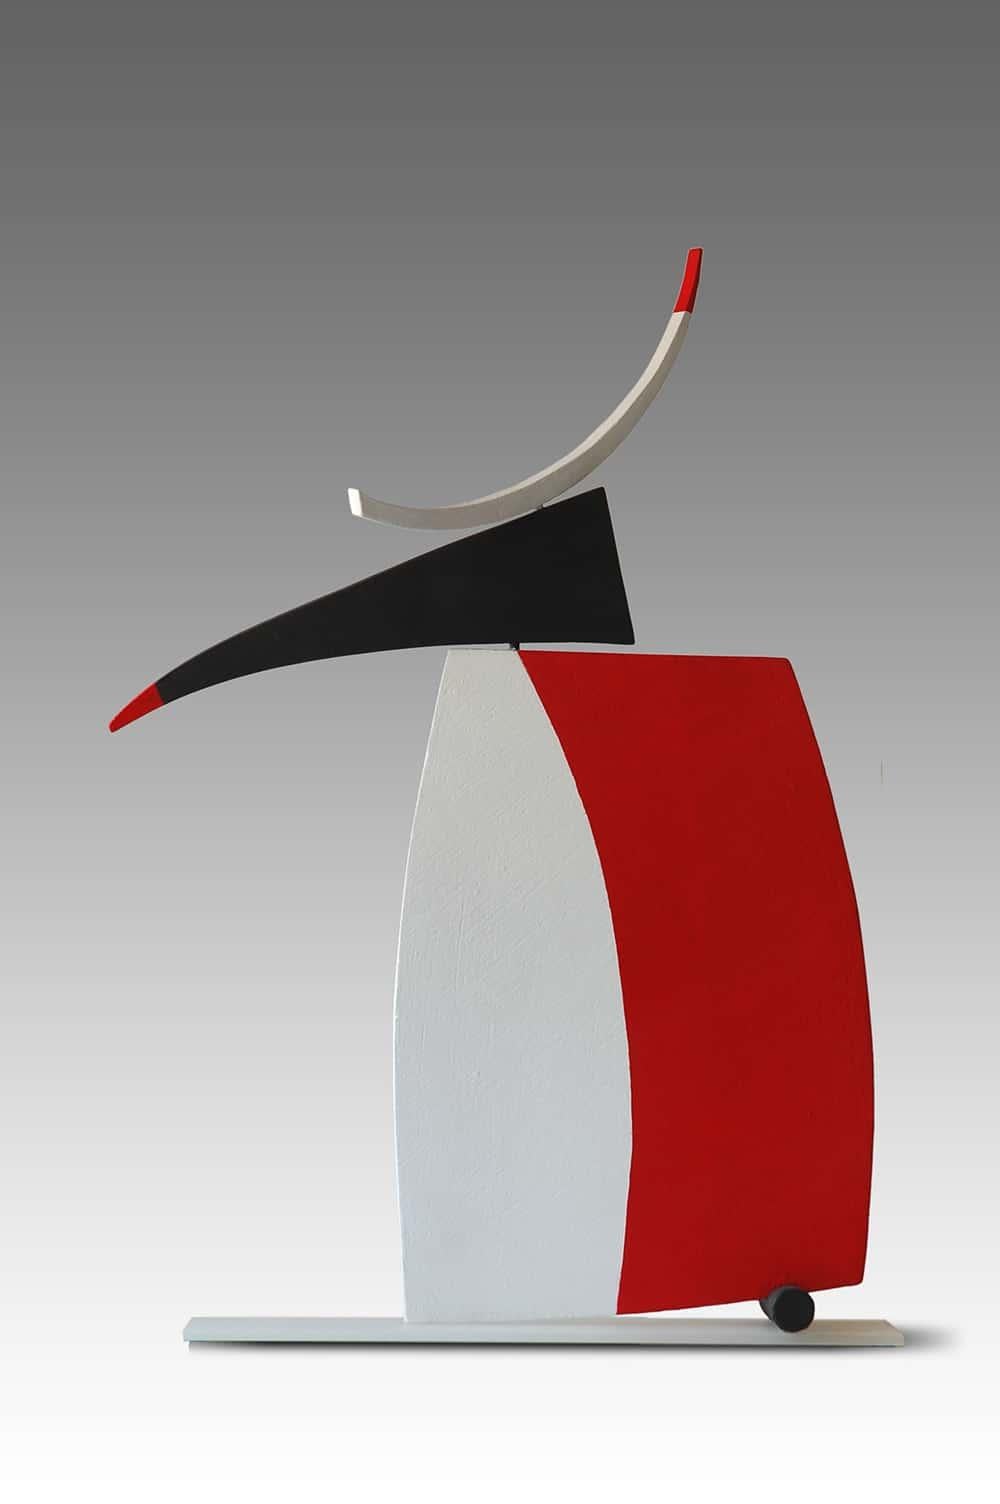 Ignite is a unique fired clay constructed, painted and mounted on glass sculpture by contemporary artist Patricia Volk, dimensions are 63 × 51 × 8 cm (24.8 × 20.1 × 3.1 in). 
The sculpture is signed and comes with a certificate of authenticity.